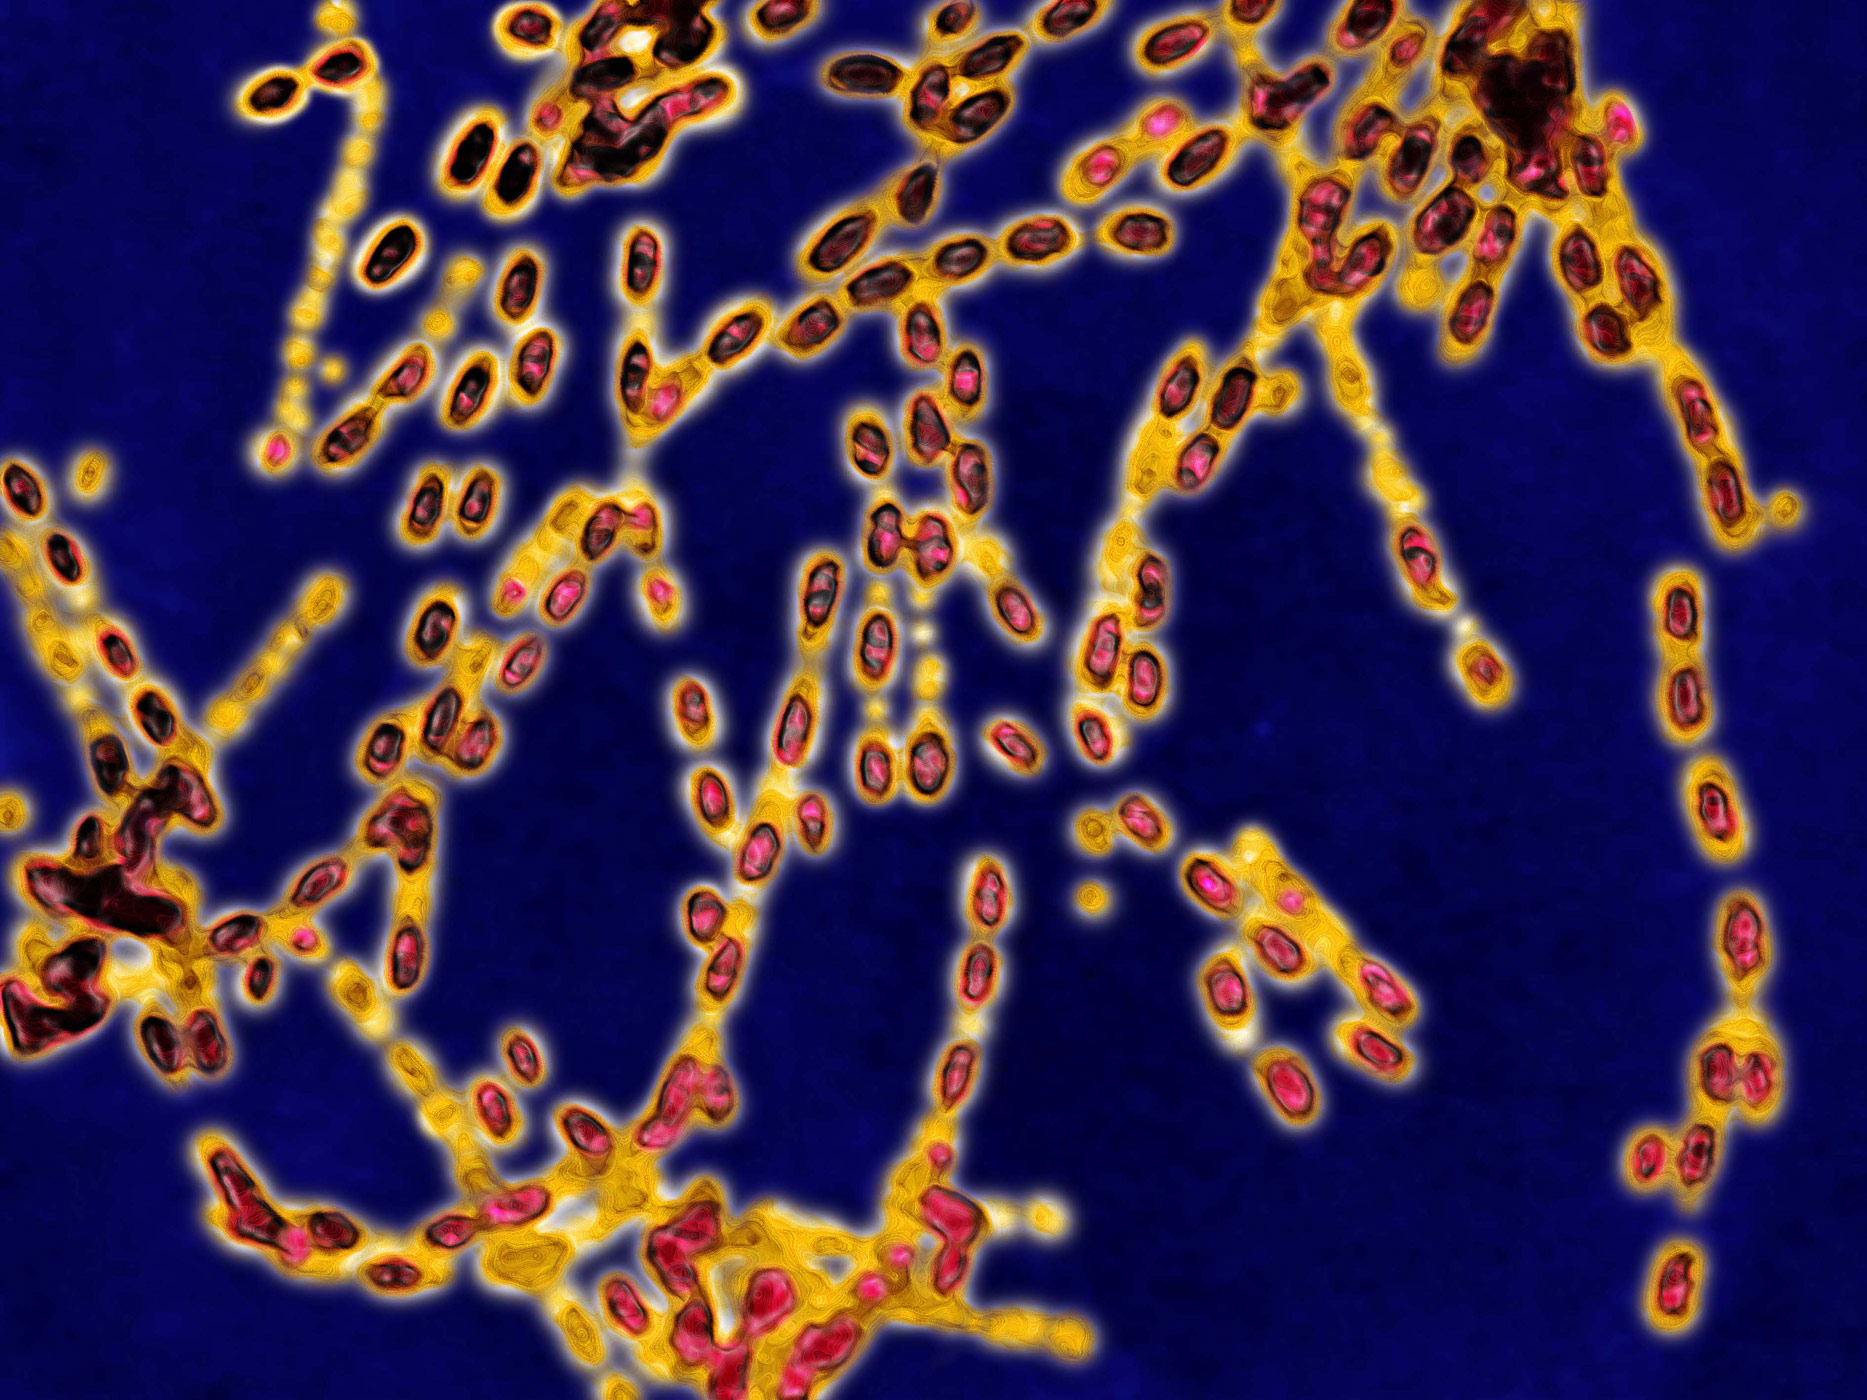 Anthrax Bacterium (Getty Images)